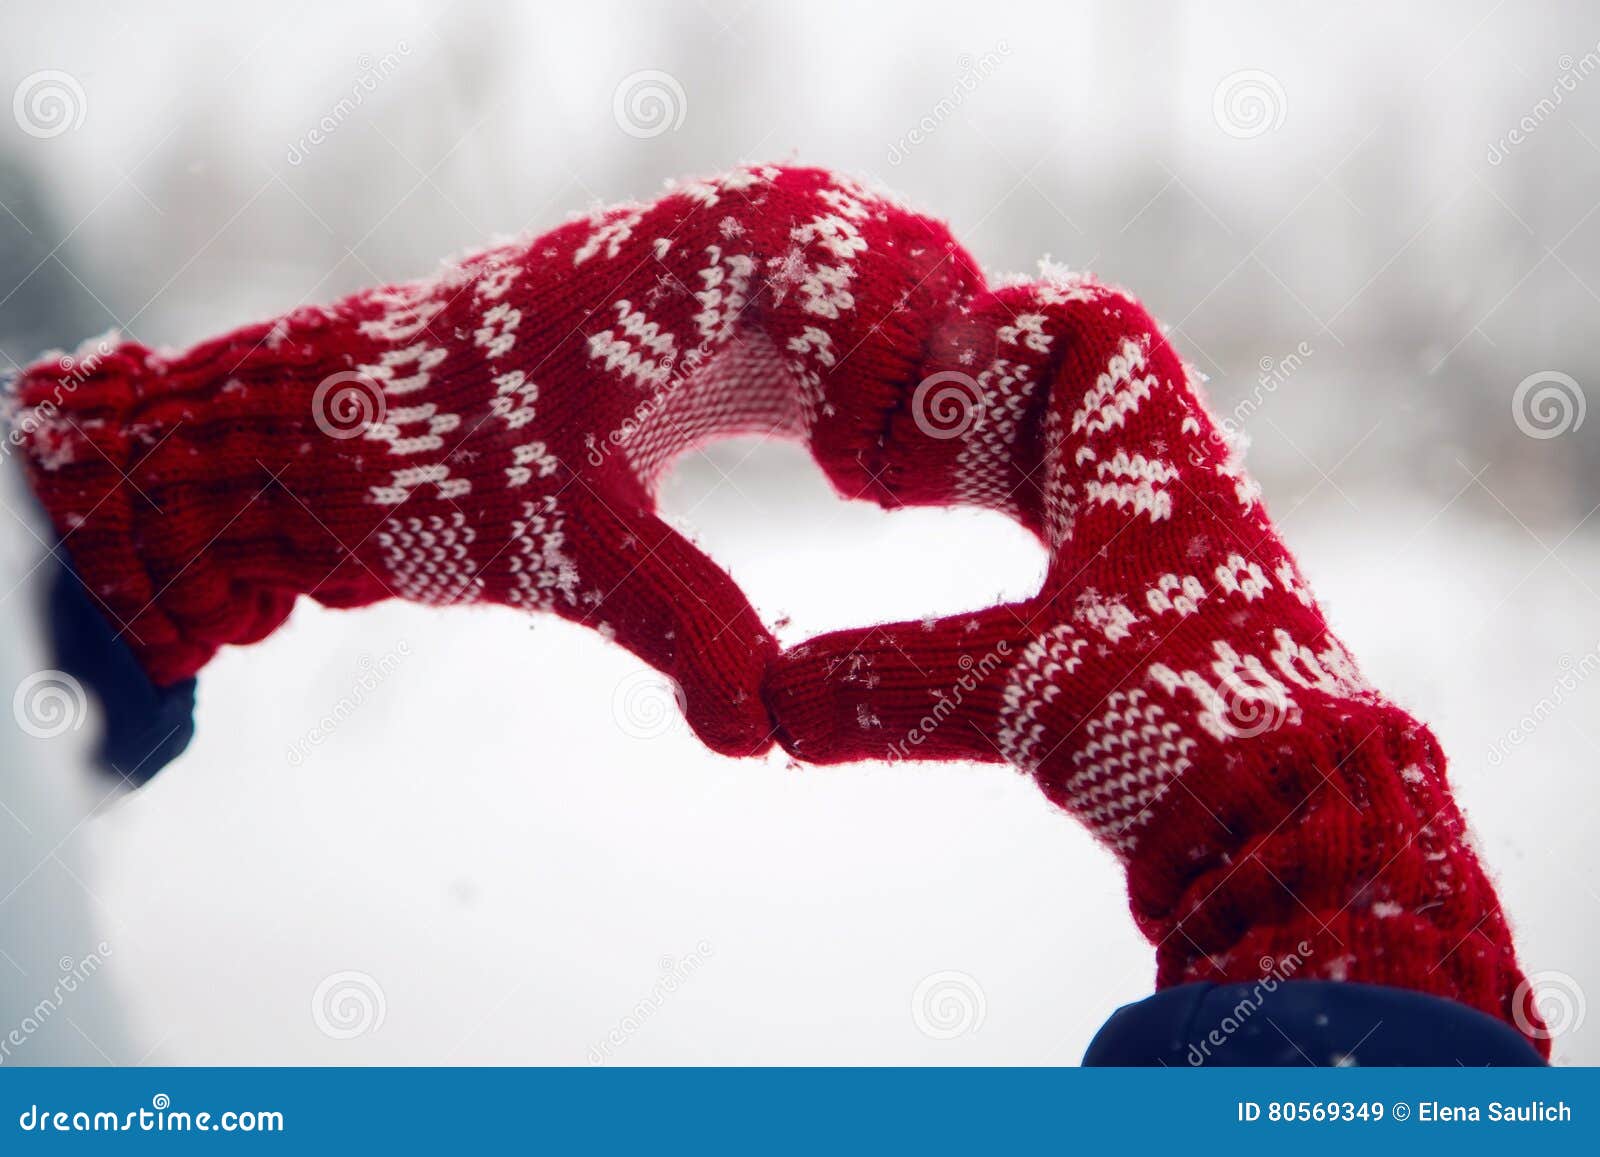 hands in red mittens folded heart